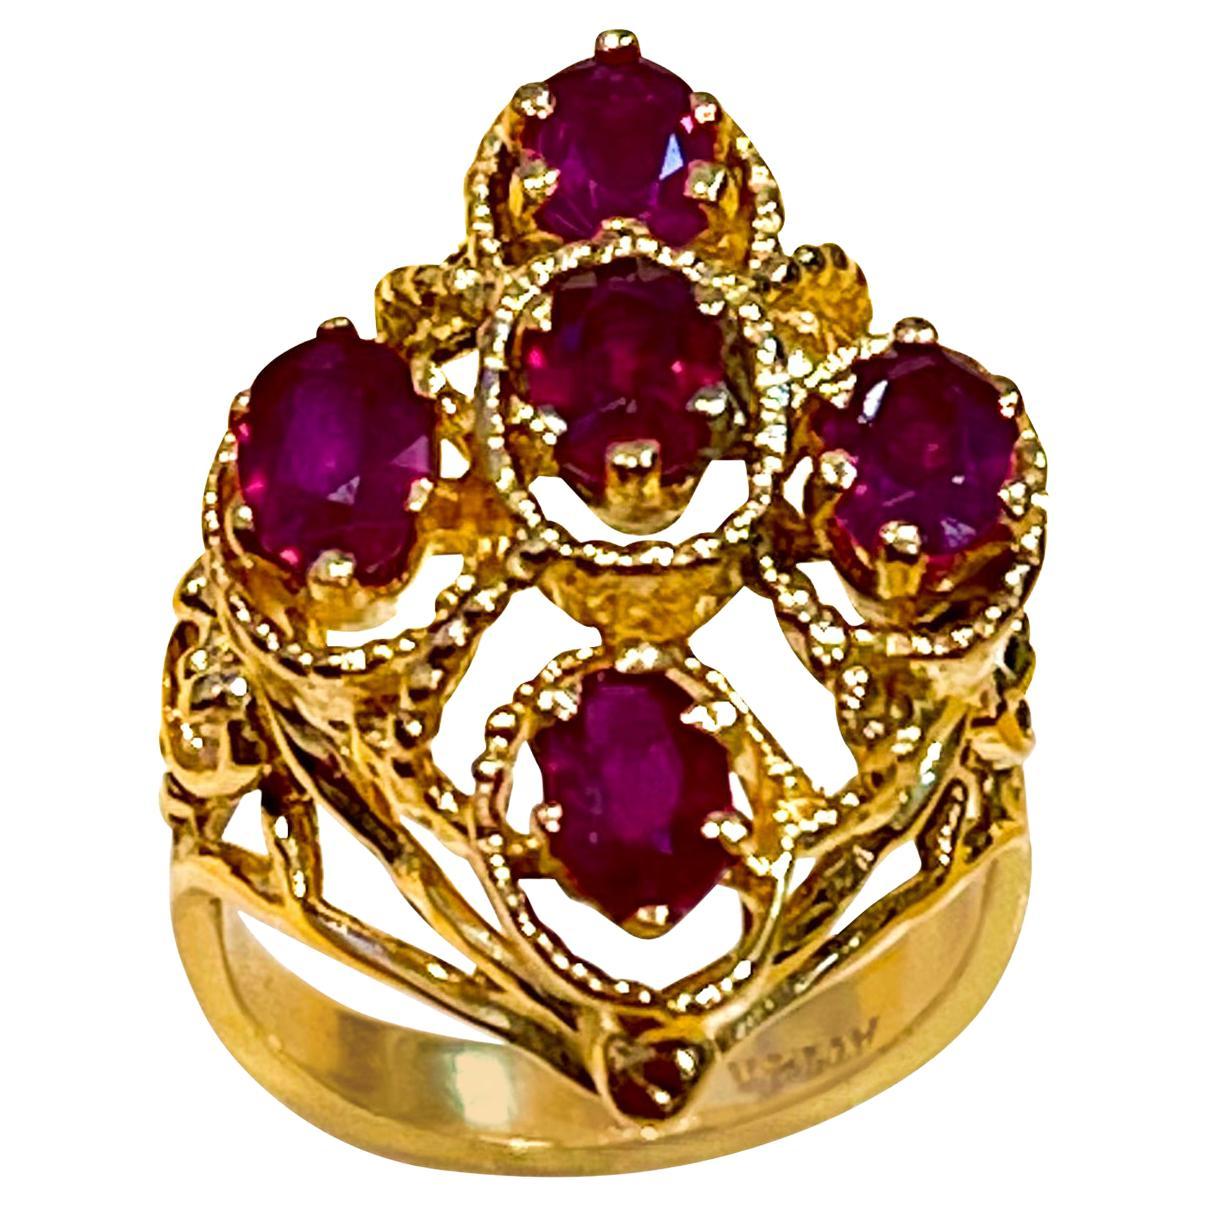 Oval Cut Treated Rubies 5 Ct 14 Karat Yellow Gold Flower Cocktail Ring